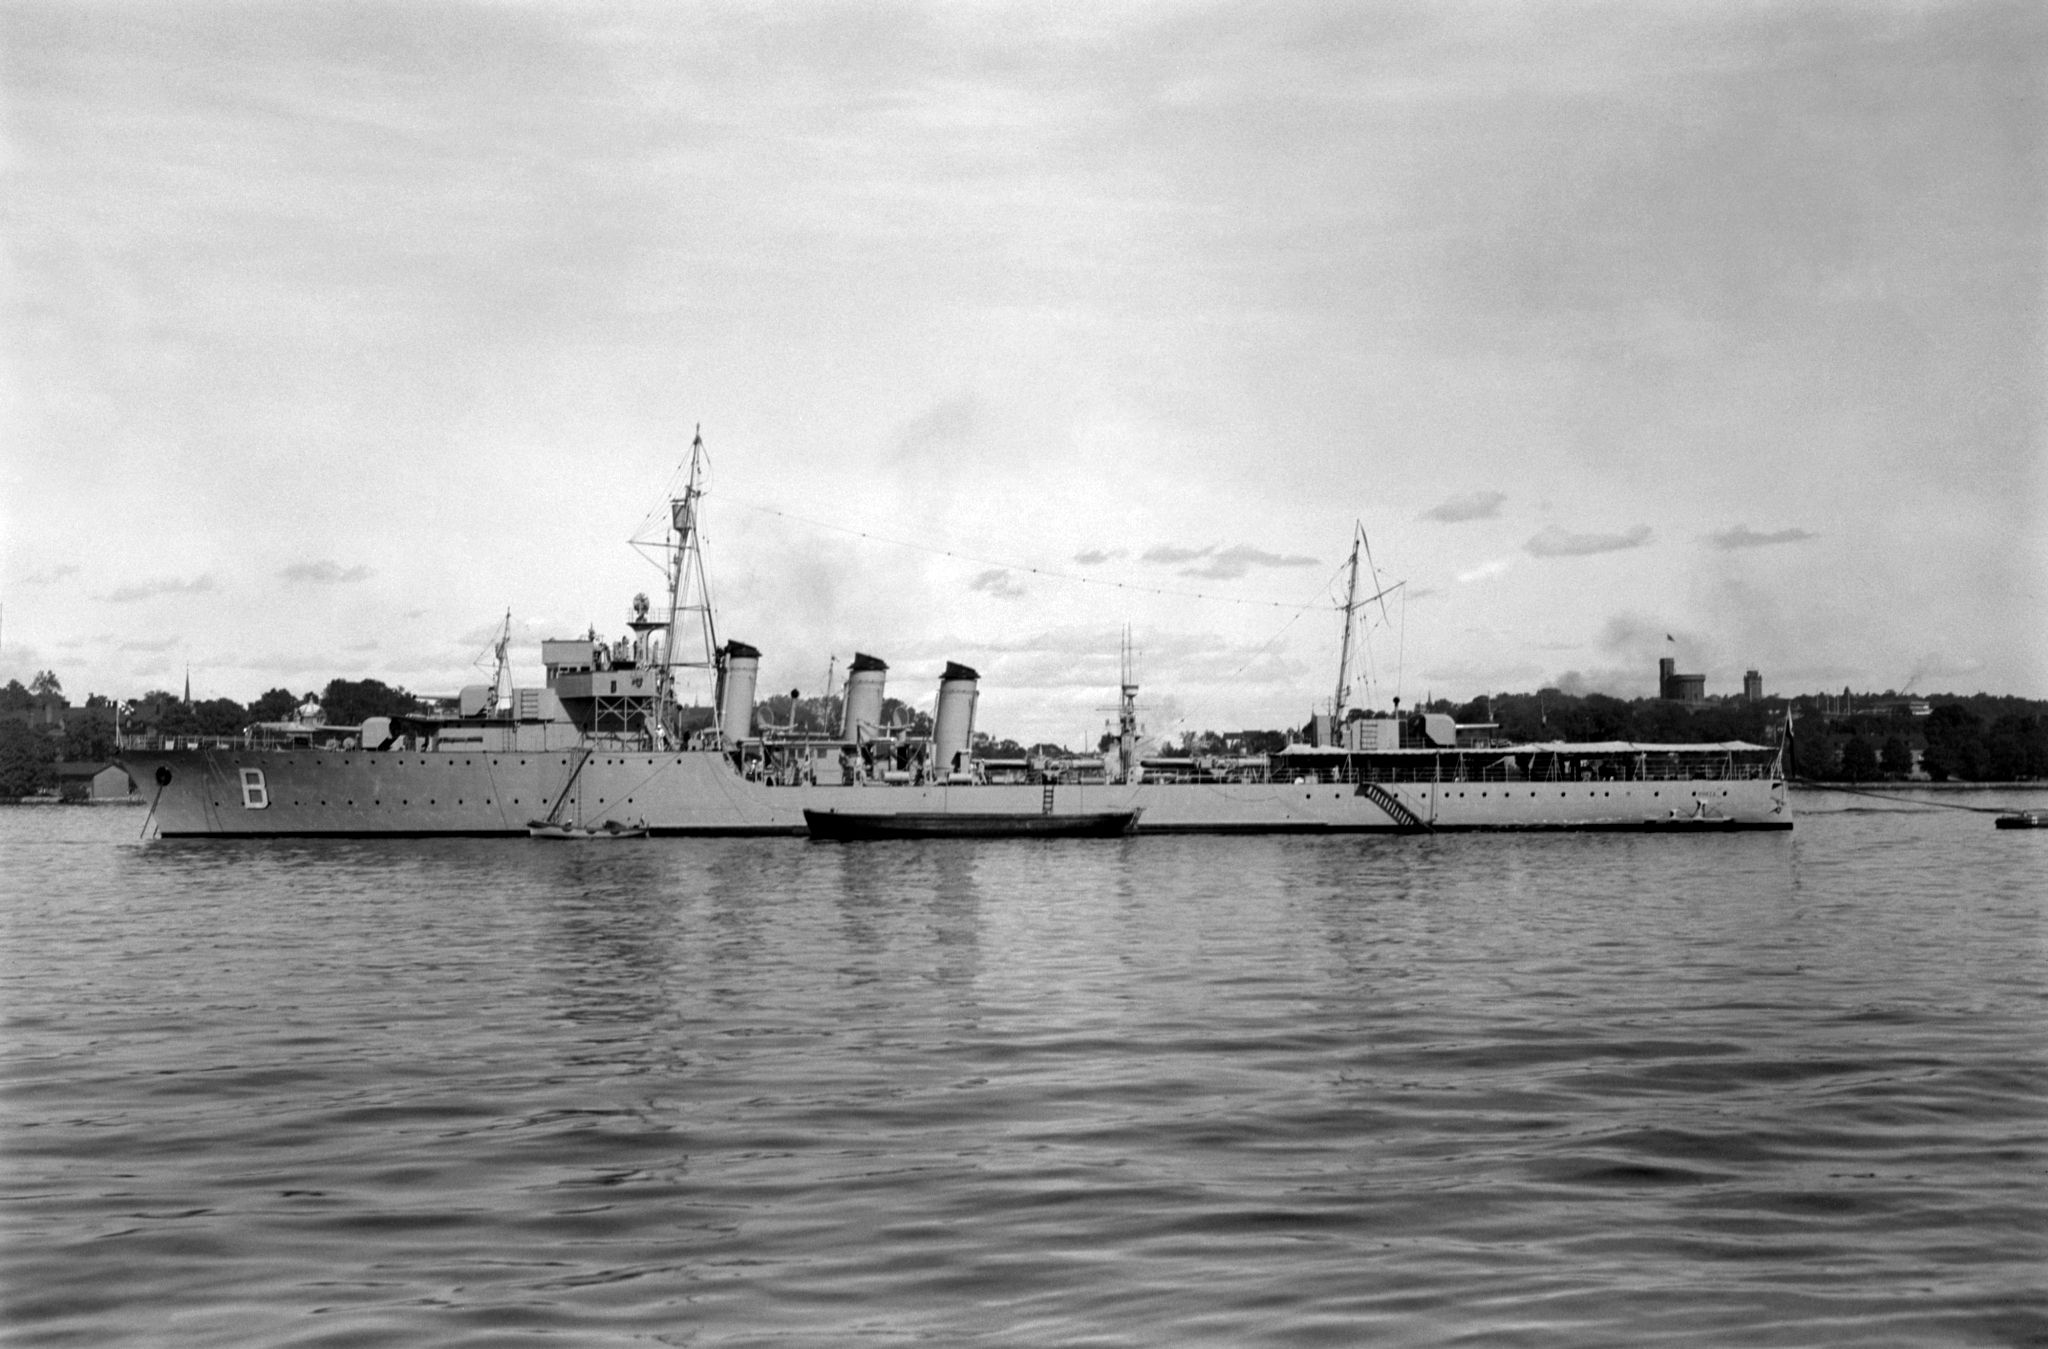 The ORP Burza, the visit of the Polish Navy ships in Stockholm, 1932 (3)